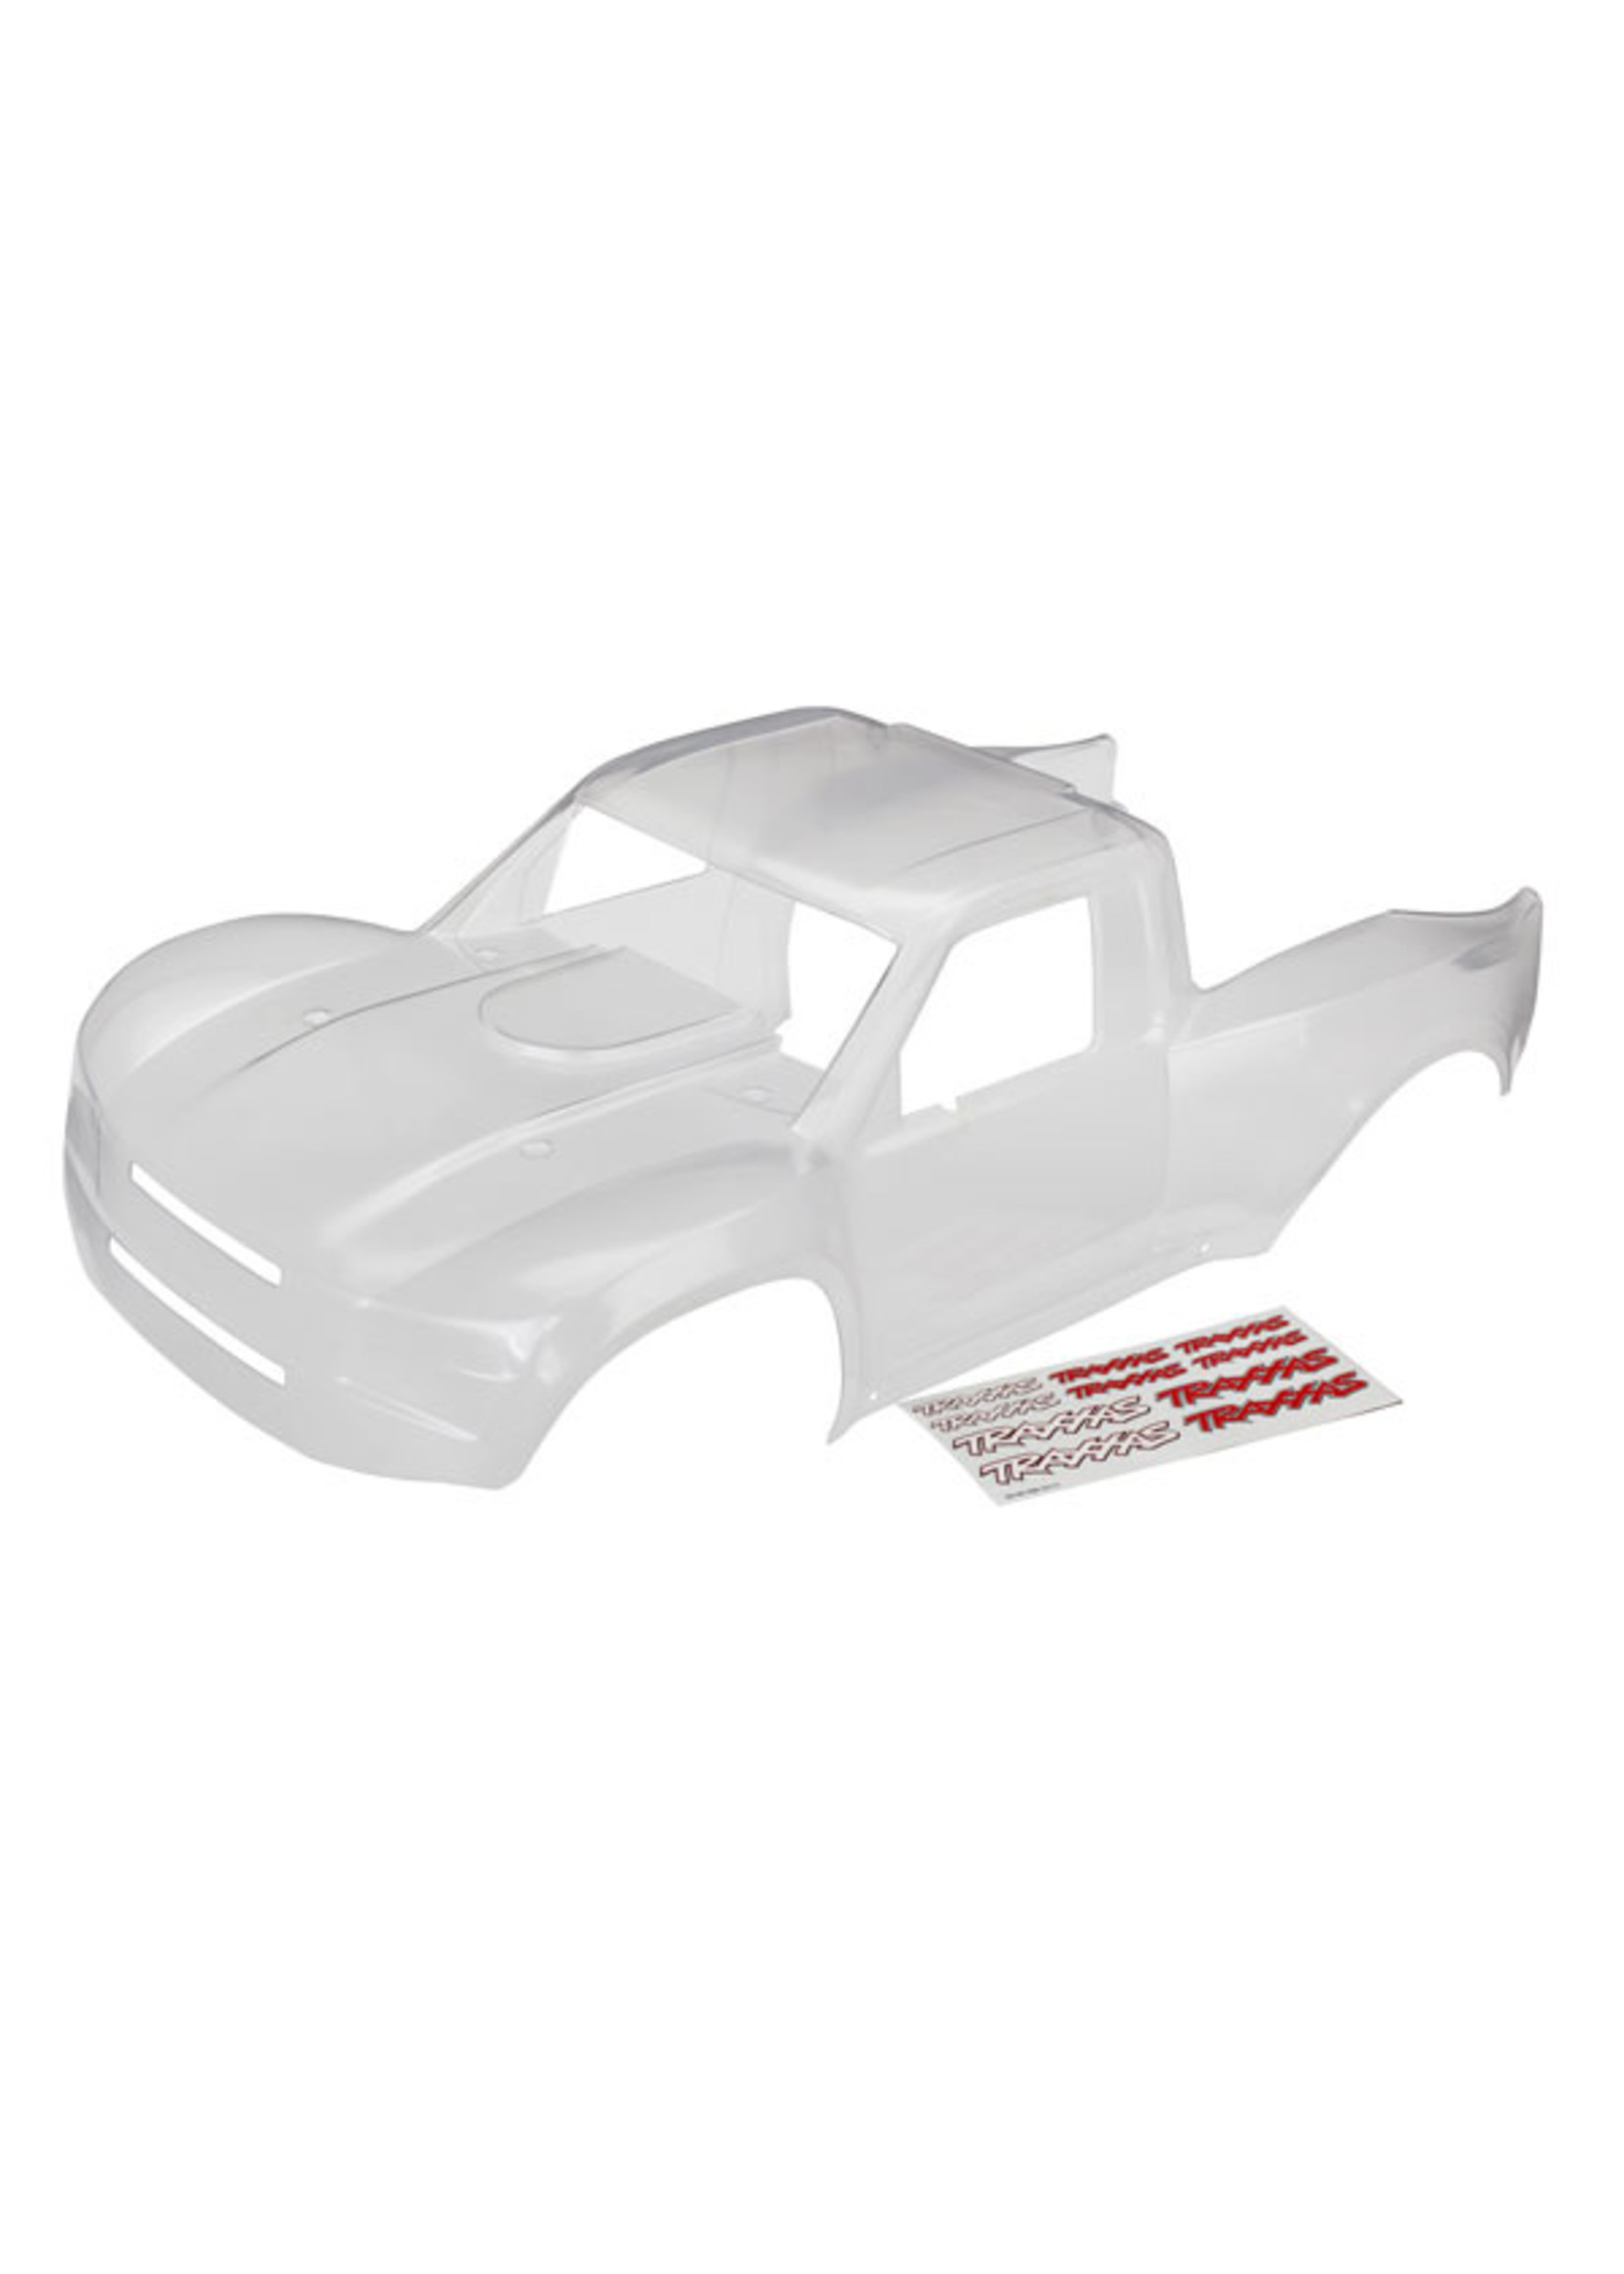 Traxxas TRA8511 Traxxas Body, Desert Racer (clear, trimmed, requires painting)/ decal sheet